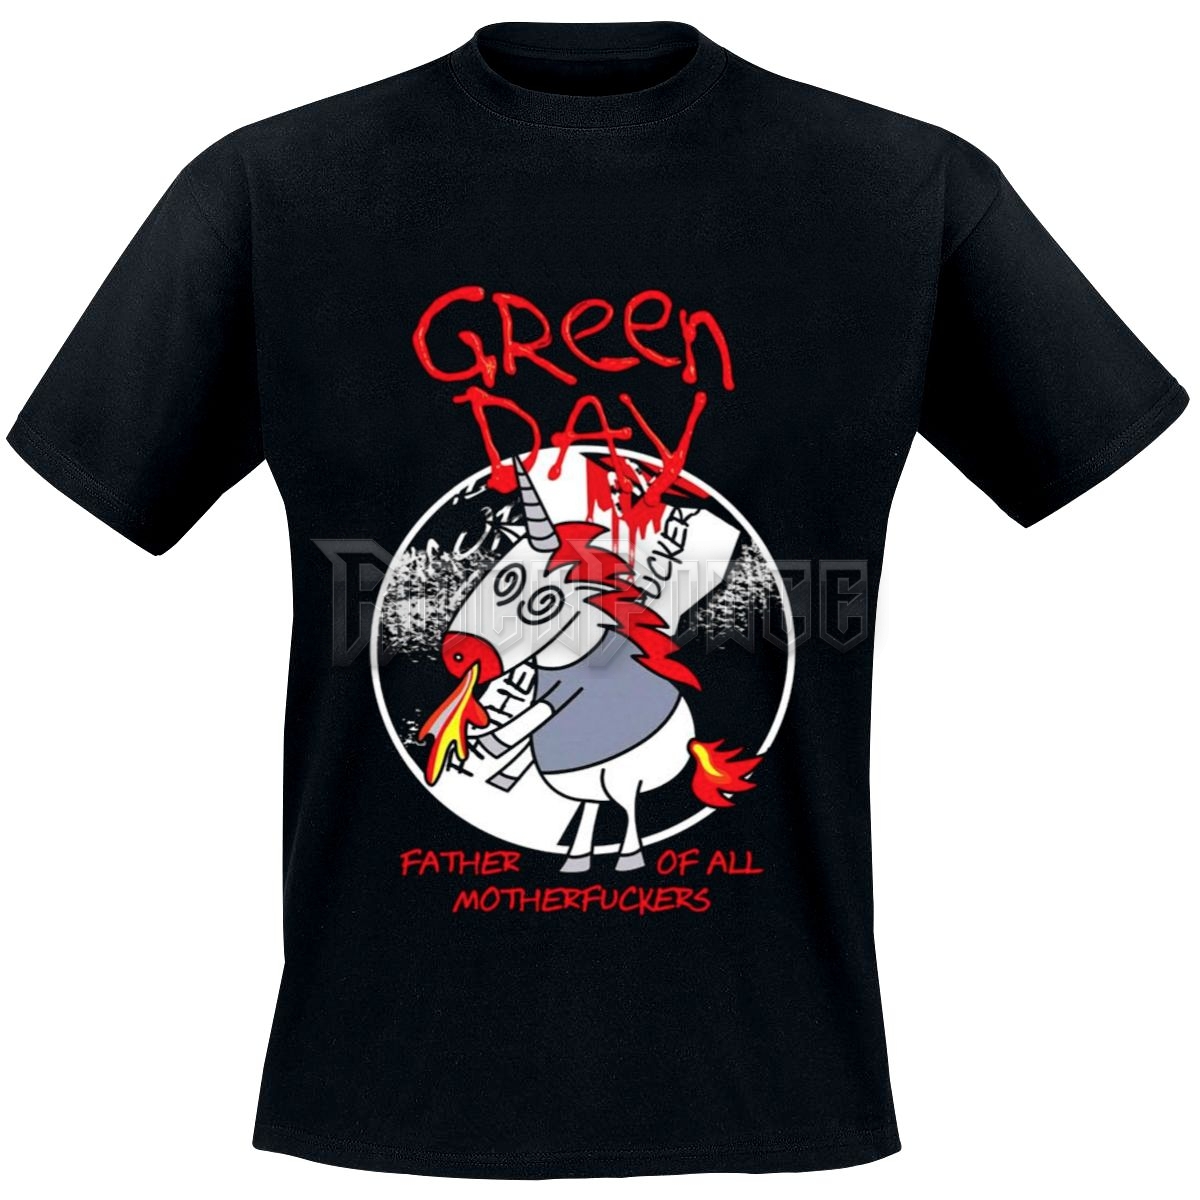 Green Day - Father of All Motherfuckers - 1492 - UNISEX PÓLÓ